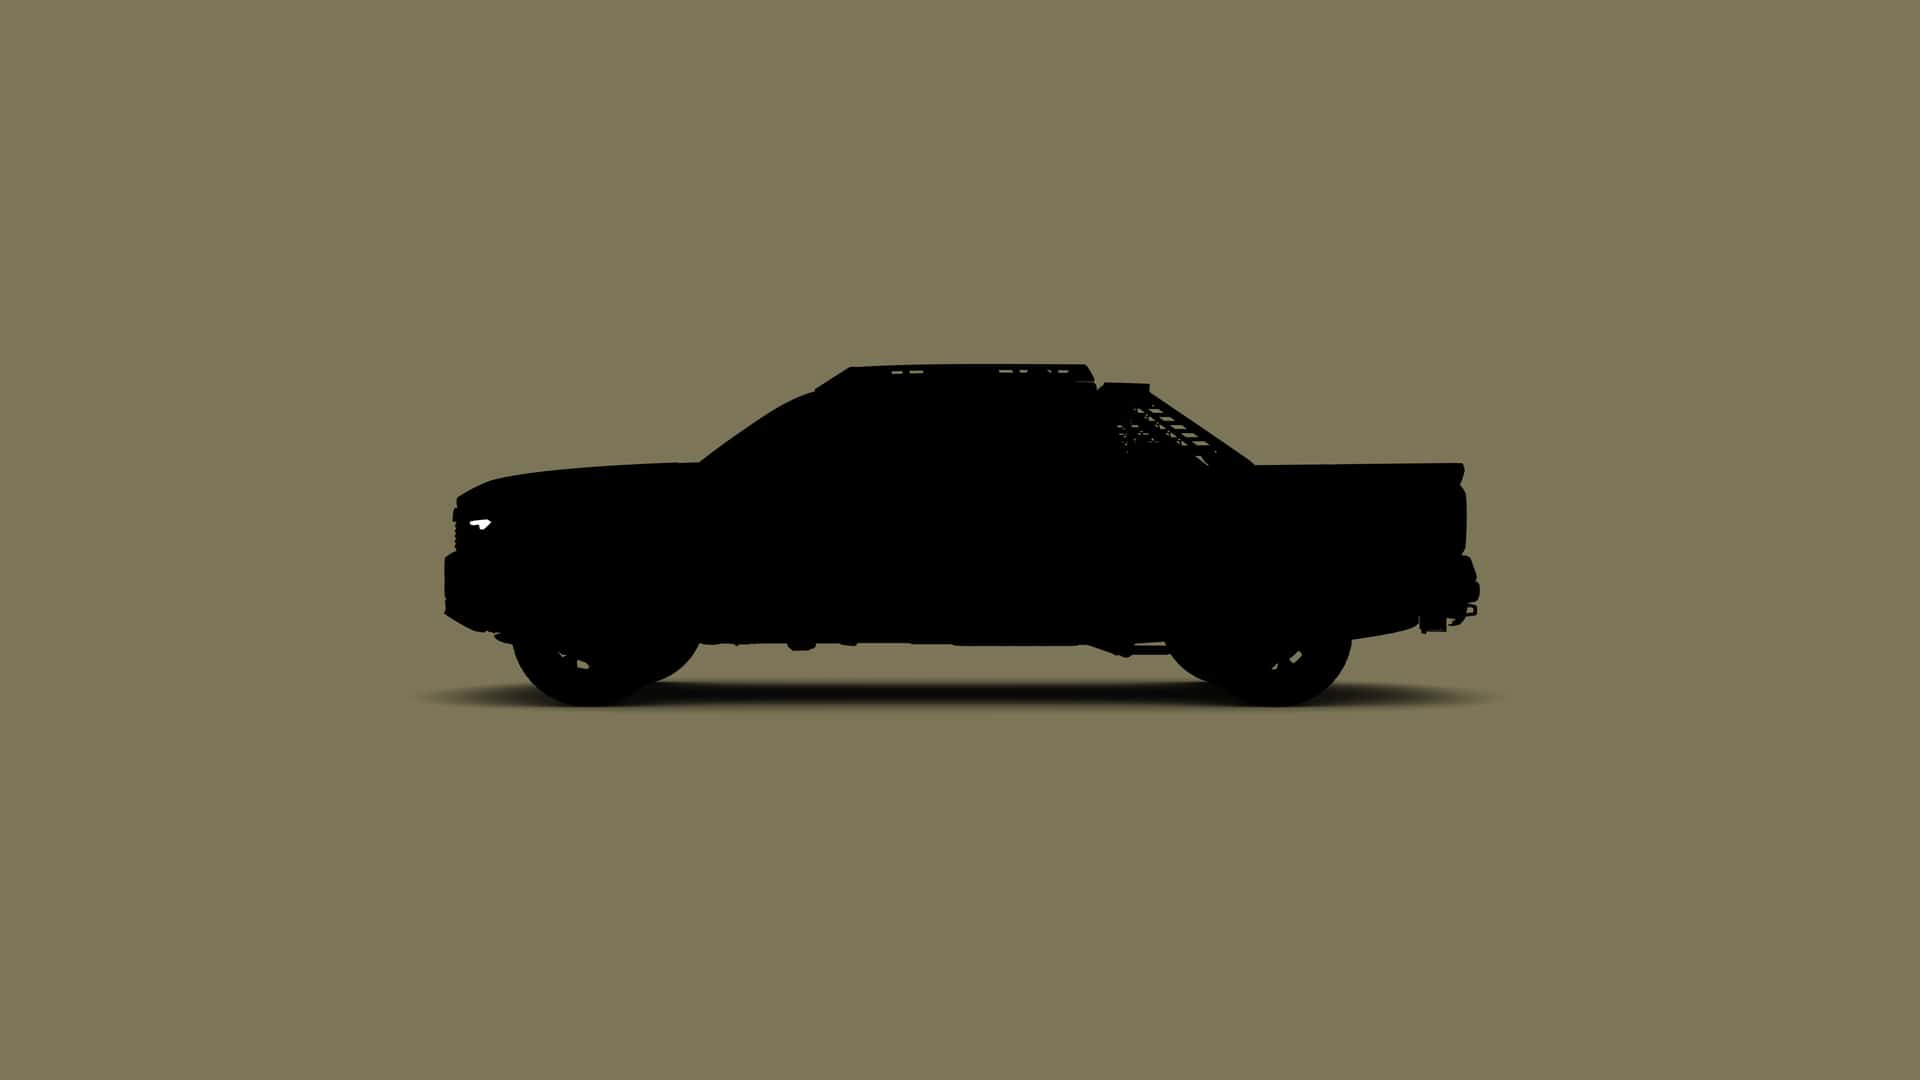 2024 Tacoma Official: 2024 Toyota Tacoma Debuts May 19 + New Silhouette Teasers Confirm Different Cab & Wheelbase Configurations 2024-toyota-tacoma-new-teaser-image3